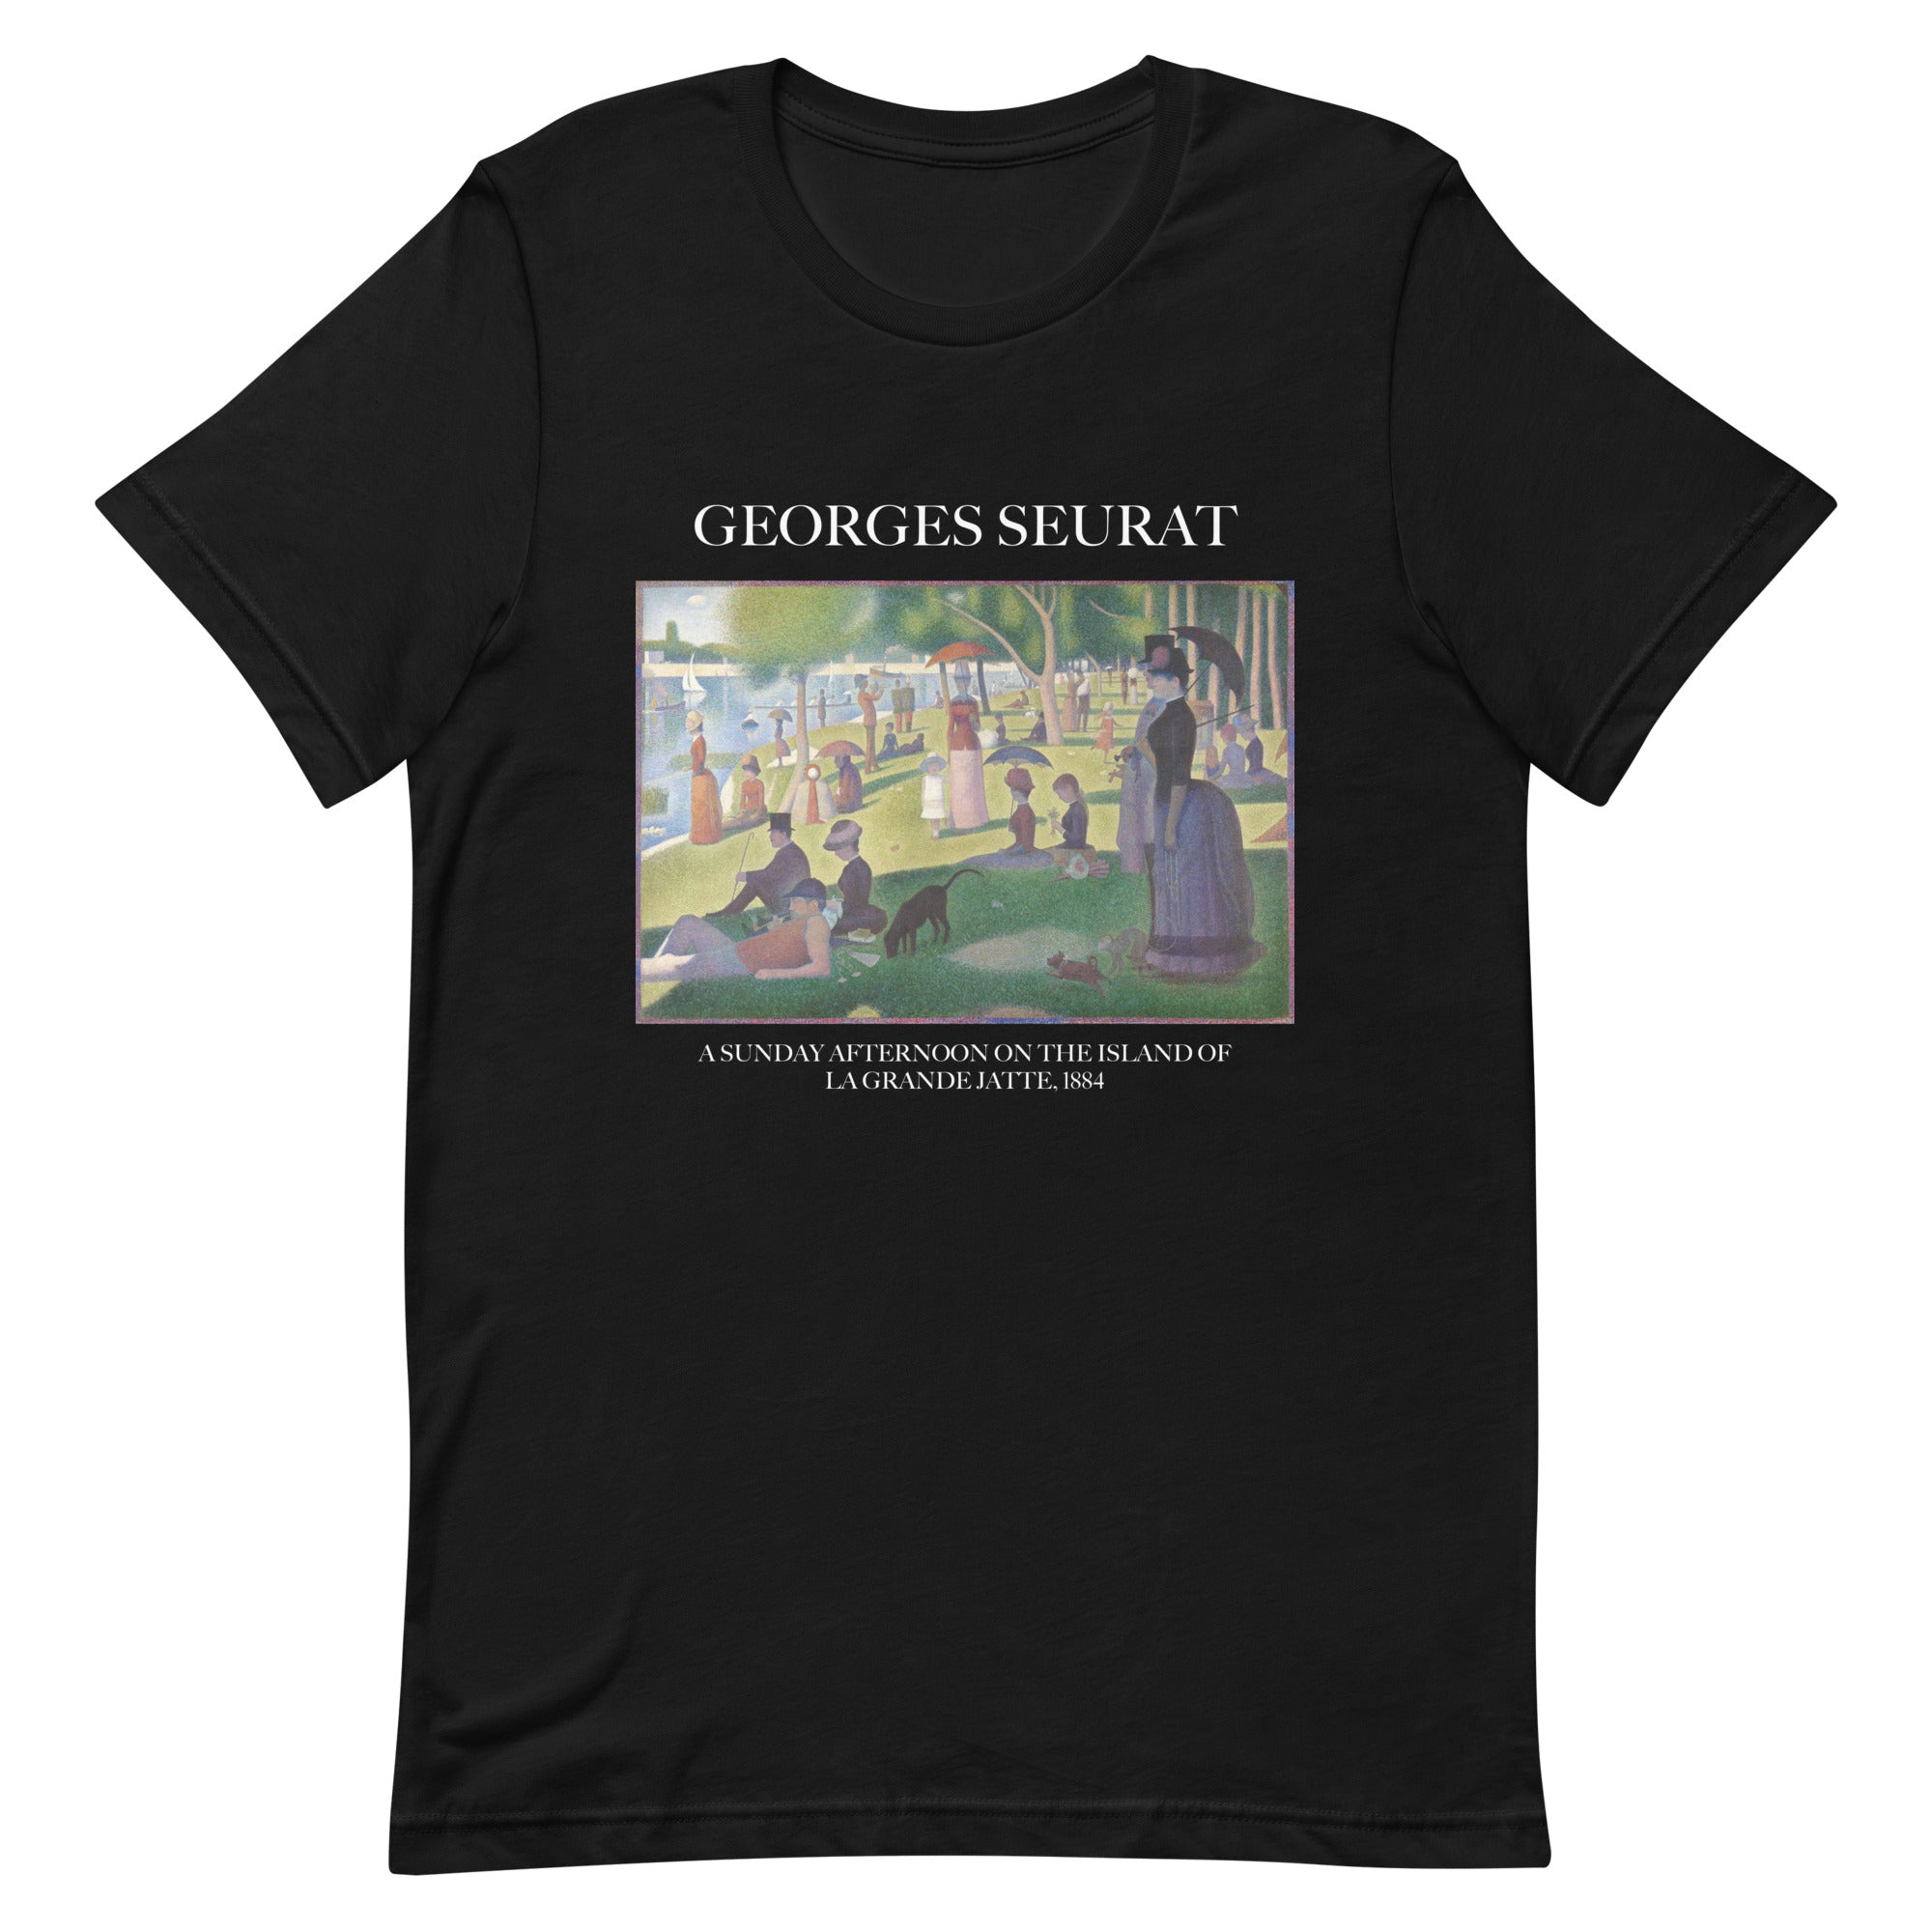 Georges Seurat 'A Sunday Afternoon on the Island of La Grande Jatte' Famous Painting T-Shirt | Unisex Classic Art Tee